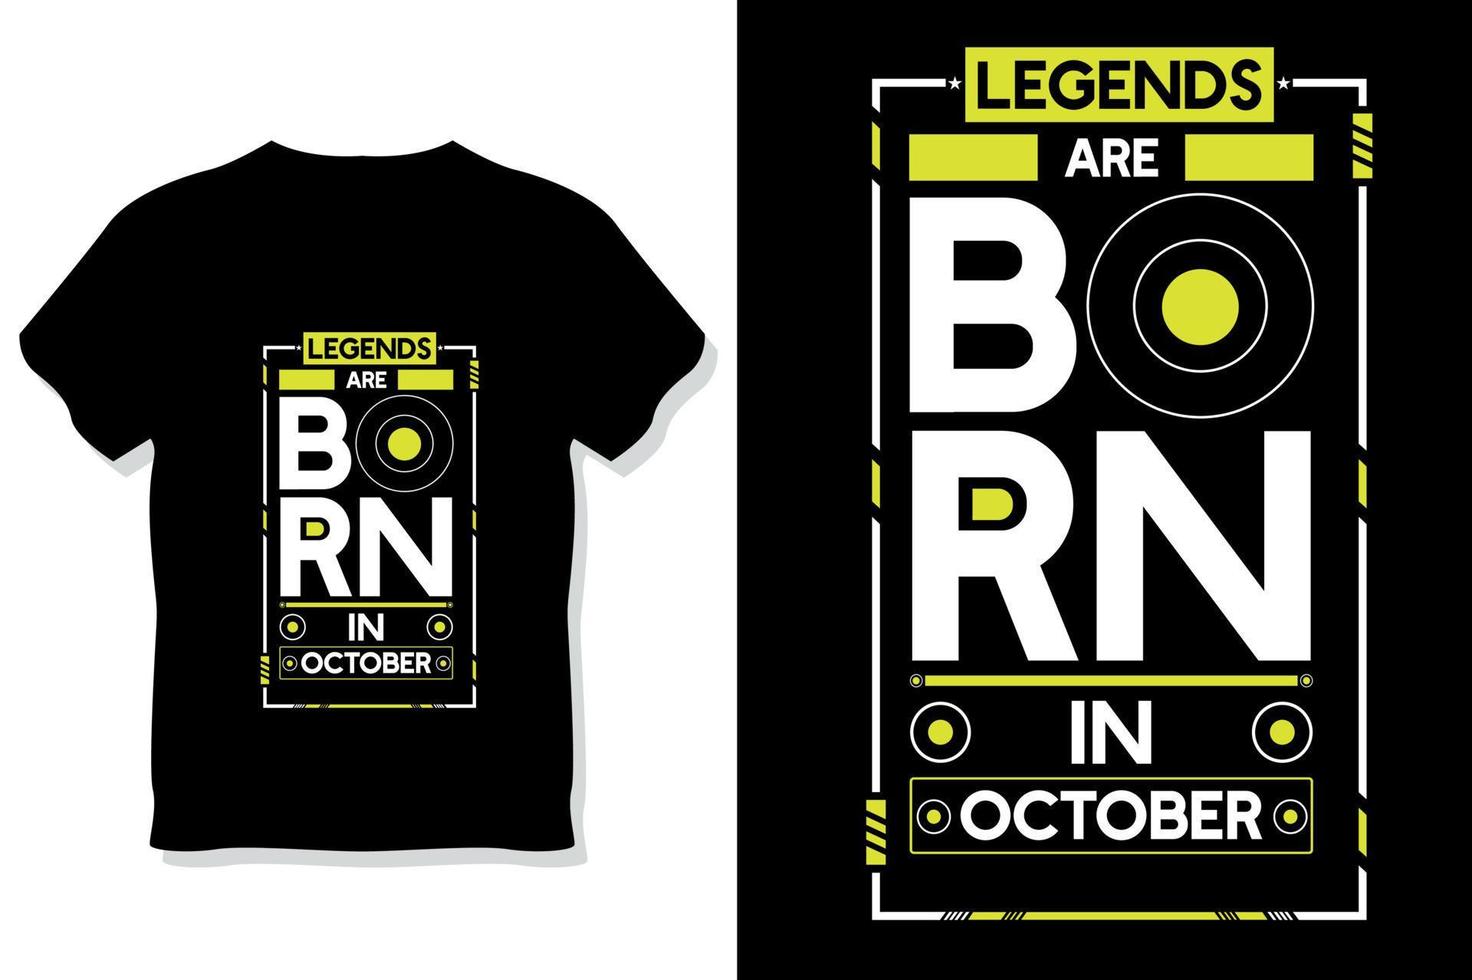 Legends are born in October birthday quotes t shirt design vector